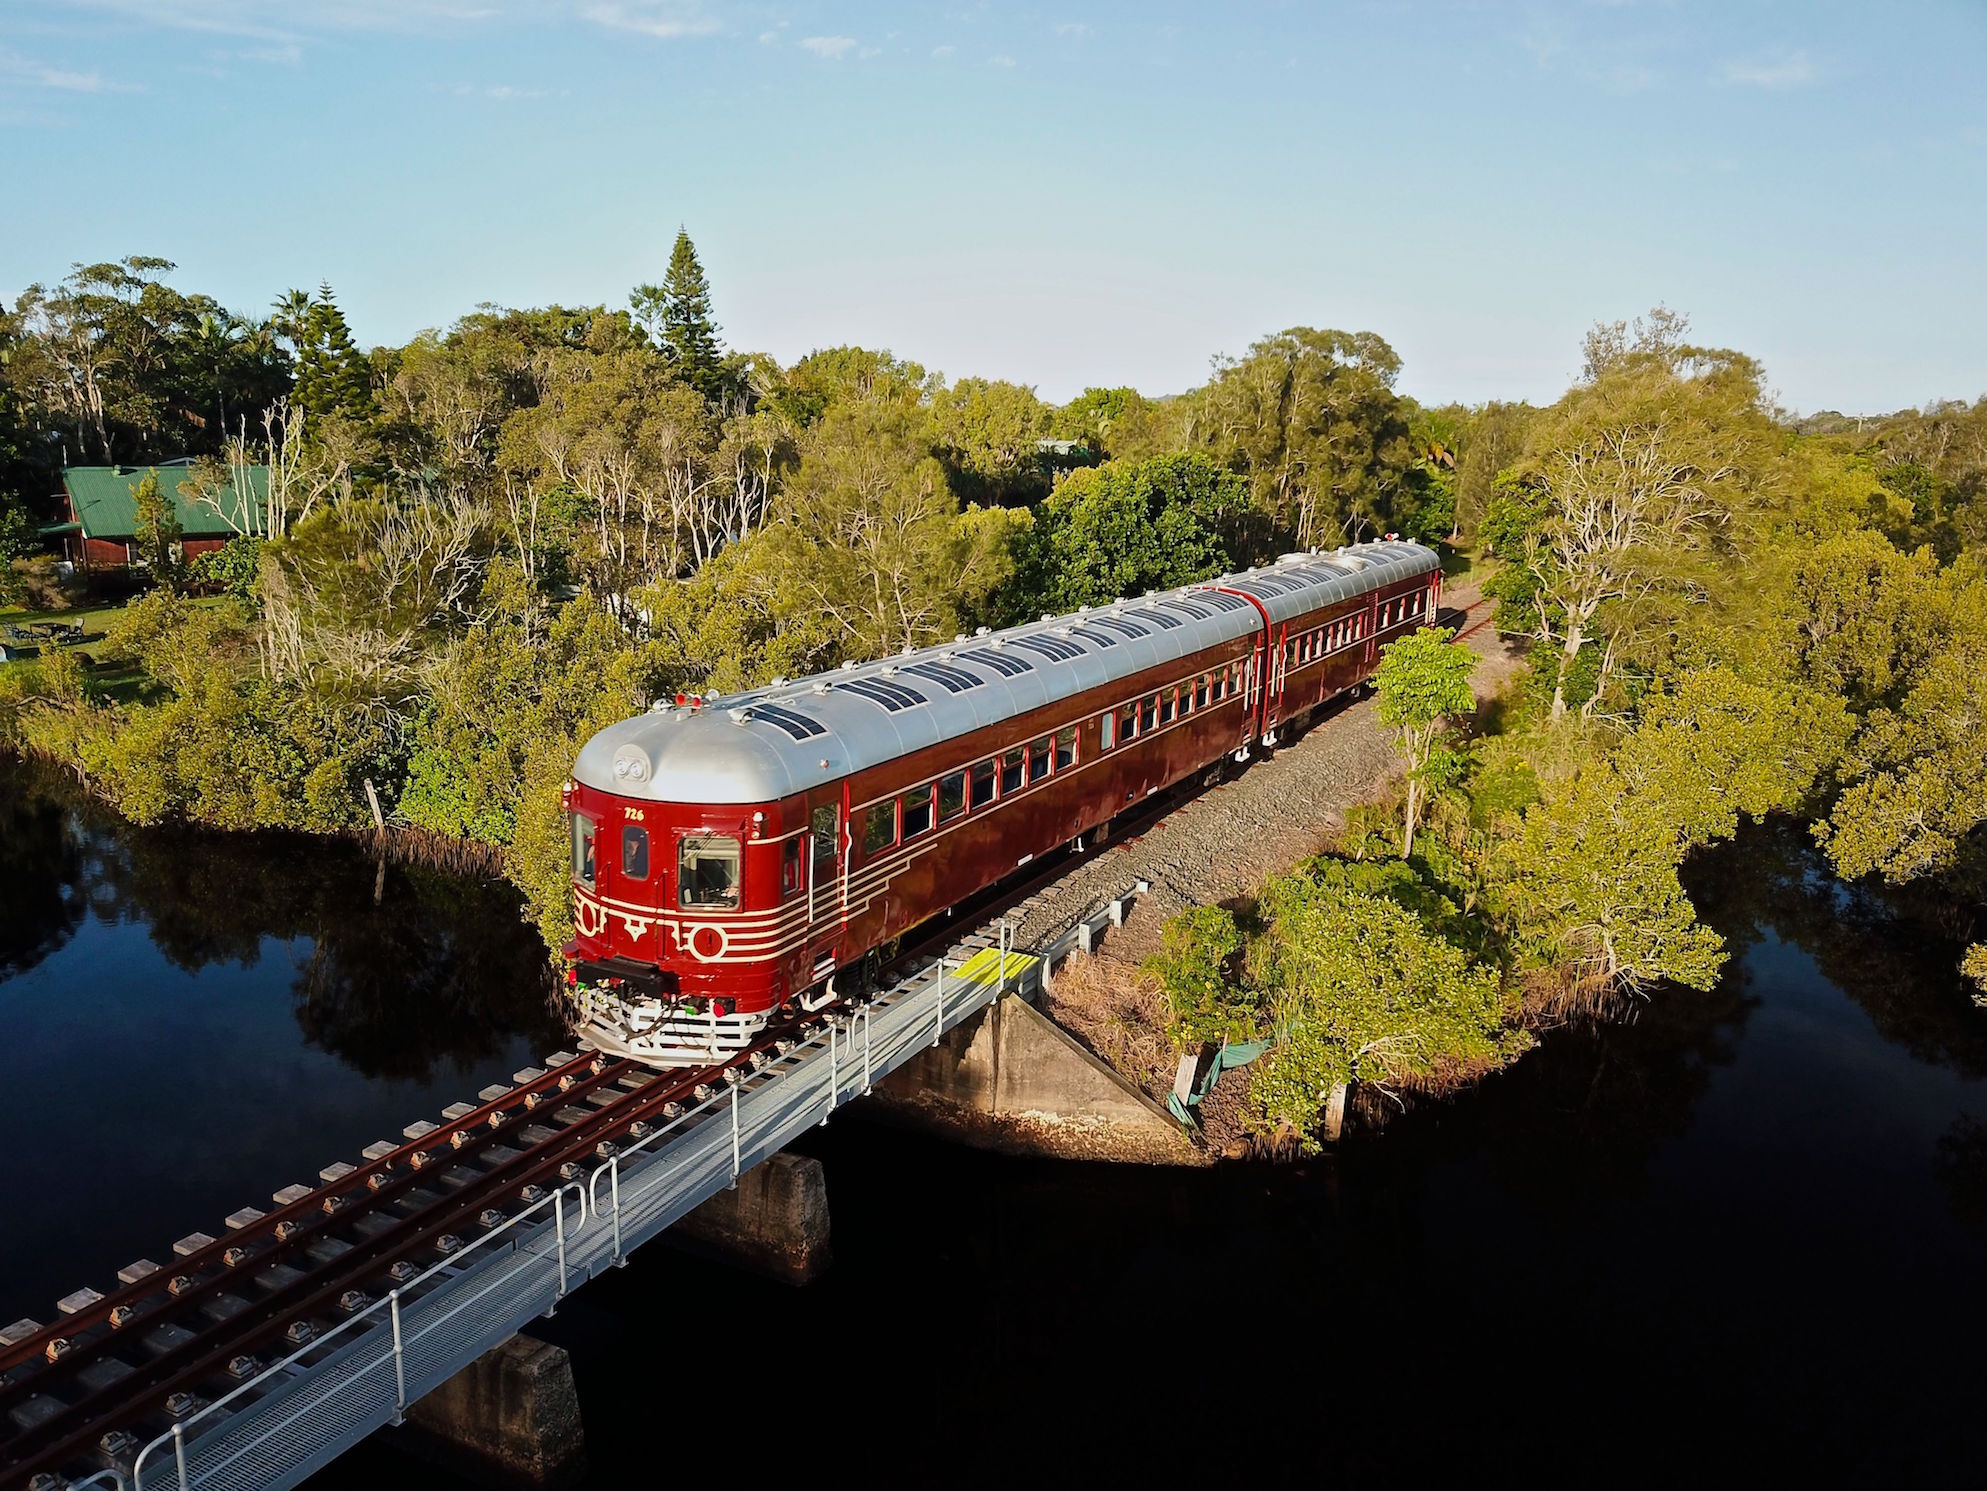 Sustainability series: Riding on the world first solar train